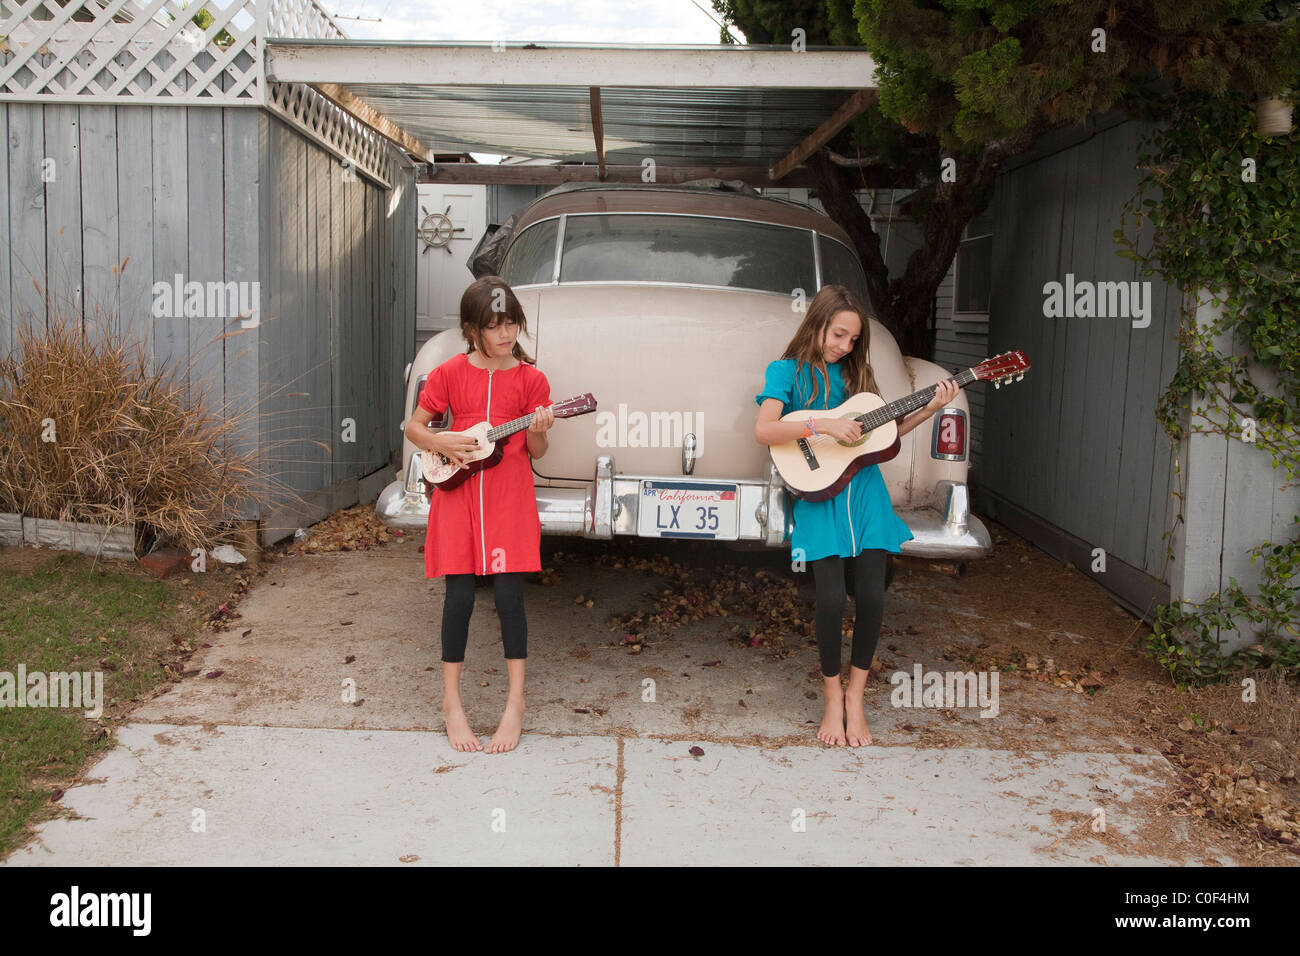 Girls playing with guitars Stock Photo